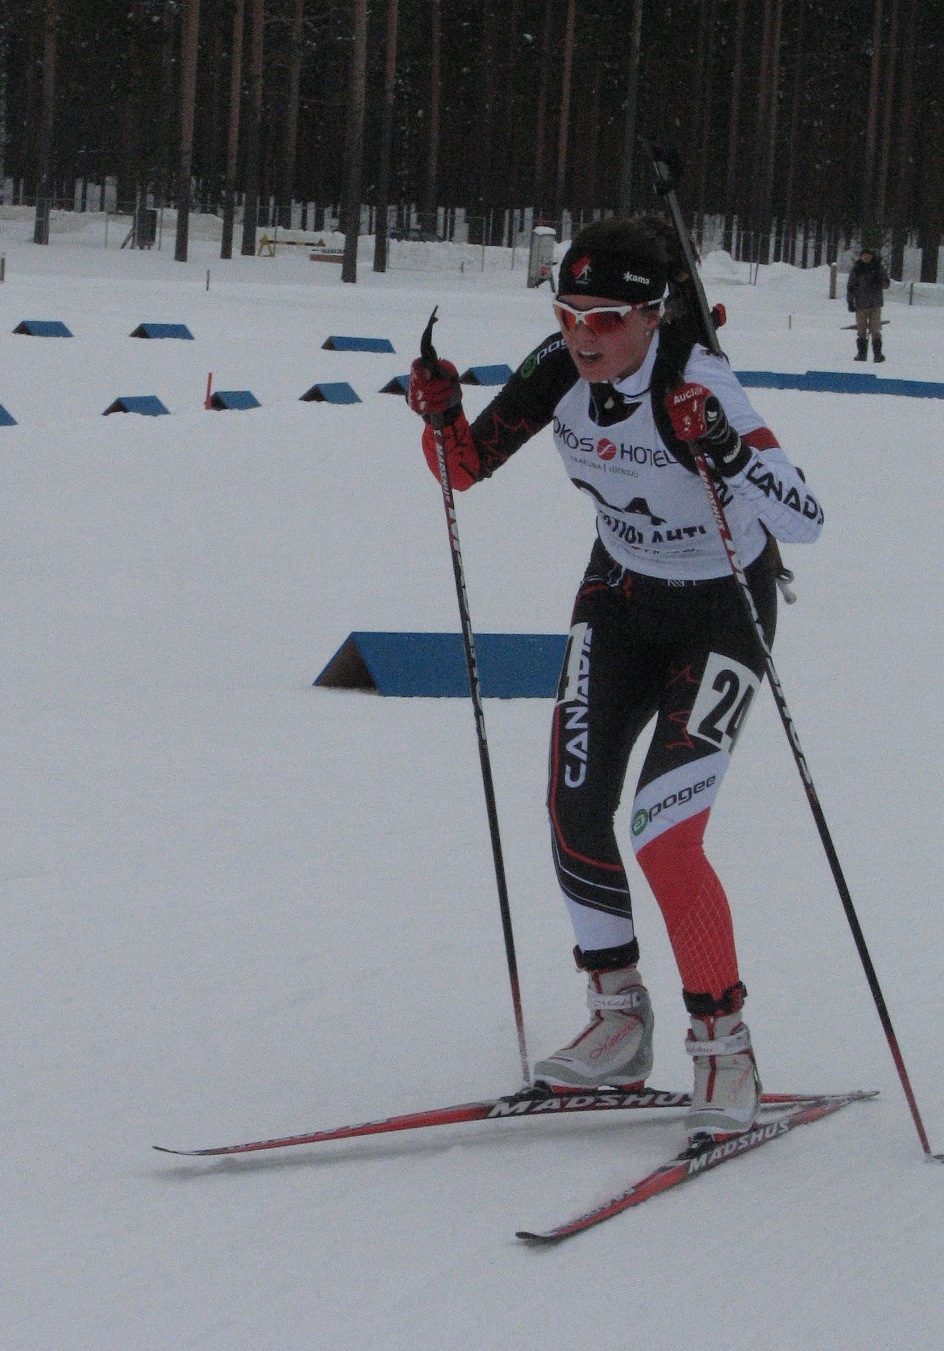 Canada Names Biathlon Team for World Youth and Junior Championships